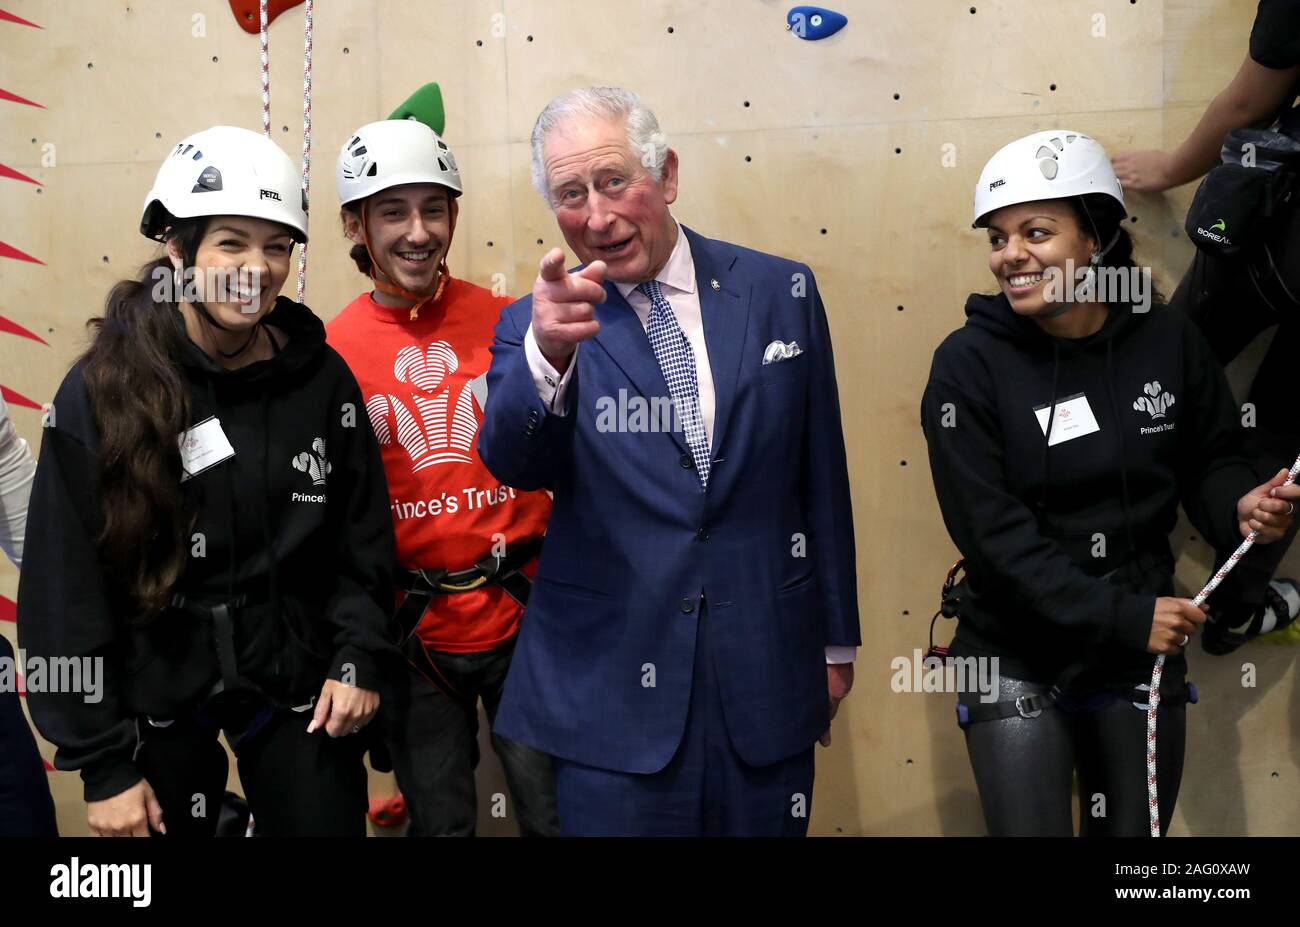 The Prince of Wales meets young people at the climbing wall during the opening of the Prince's Trust charity's new south London centre in Southwark. Stock Photo